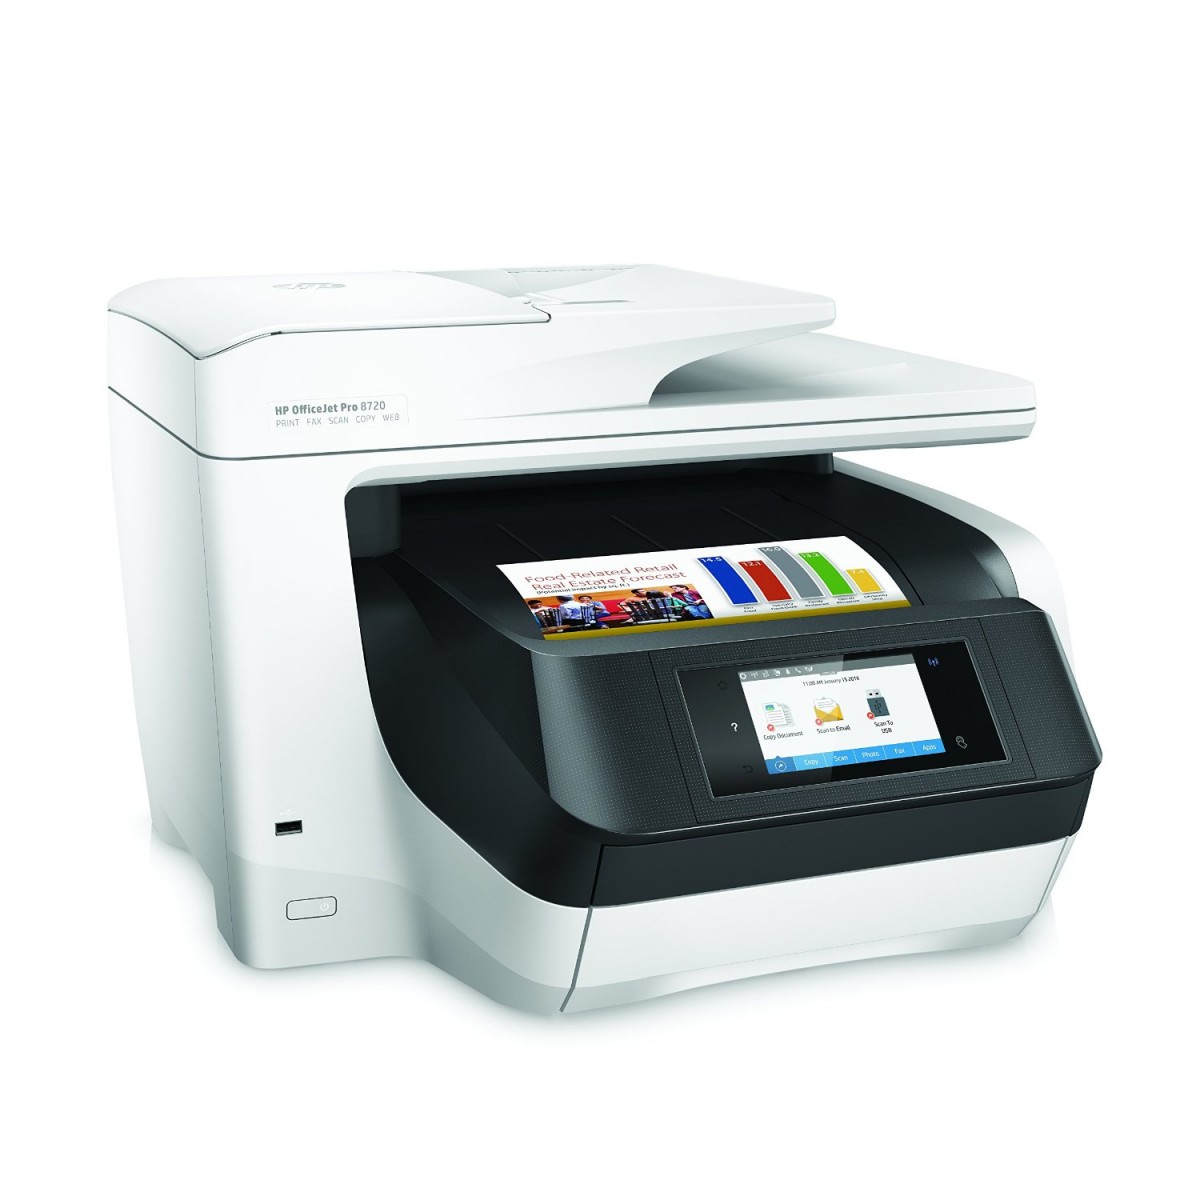 hp officejet pro 8720 home printer review